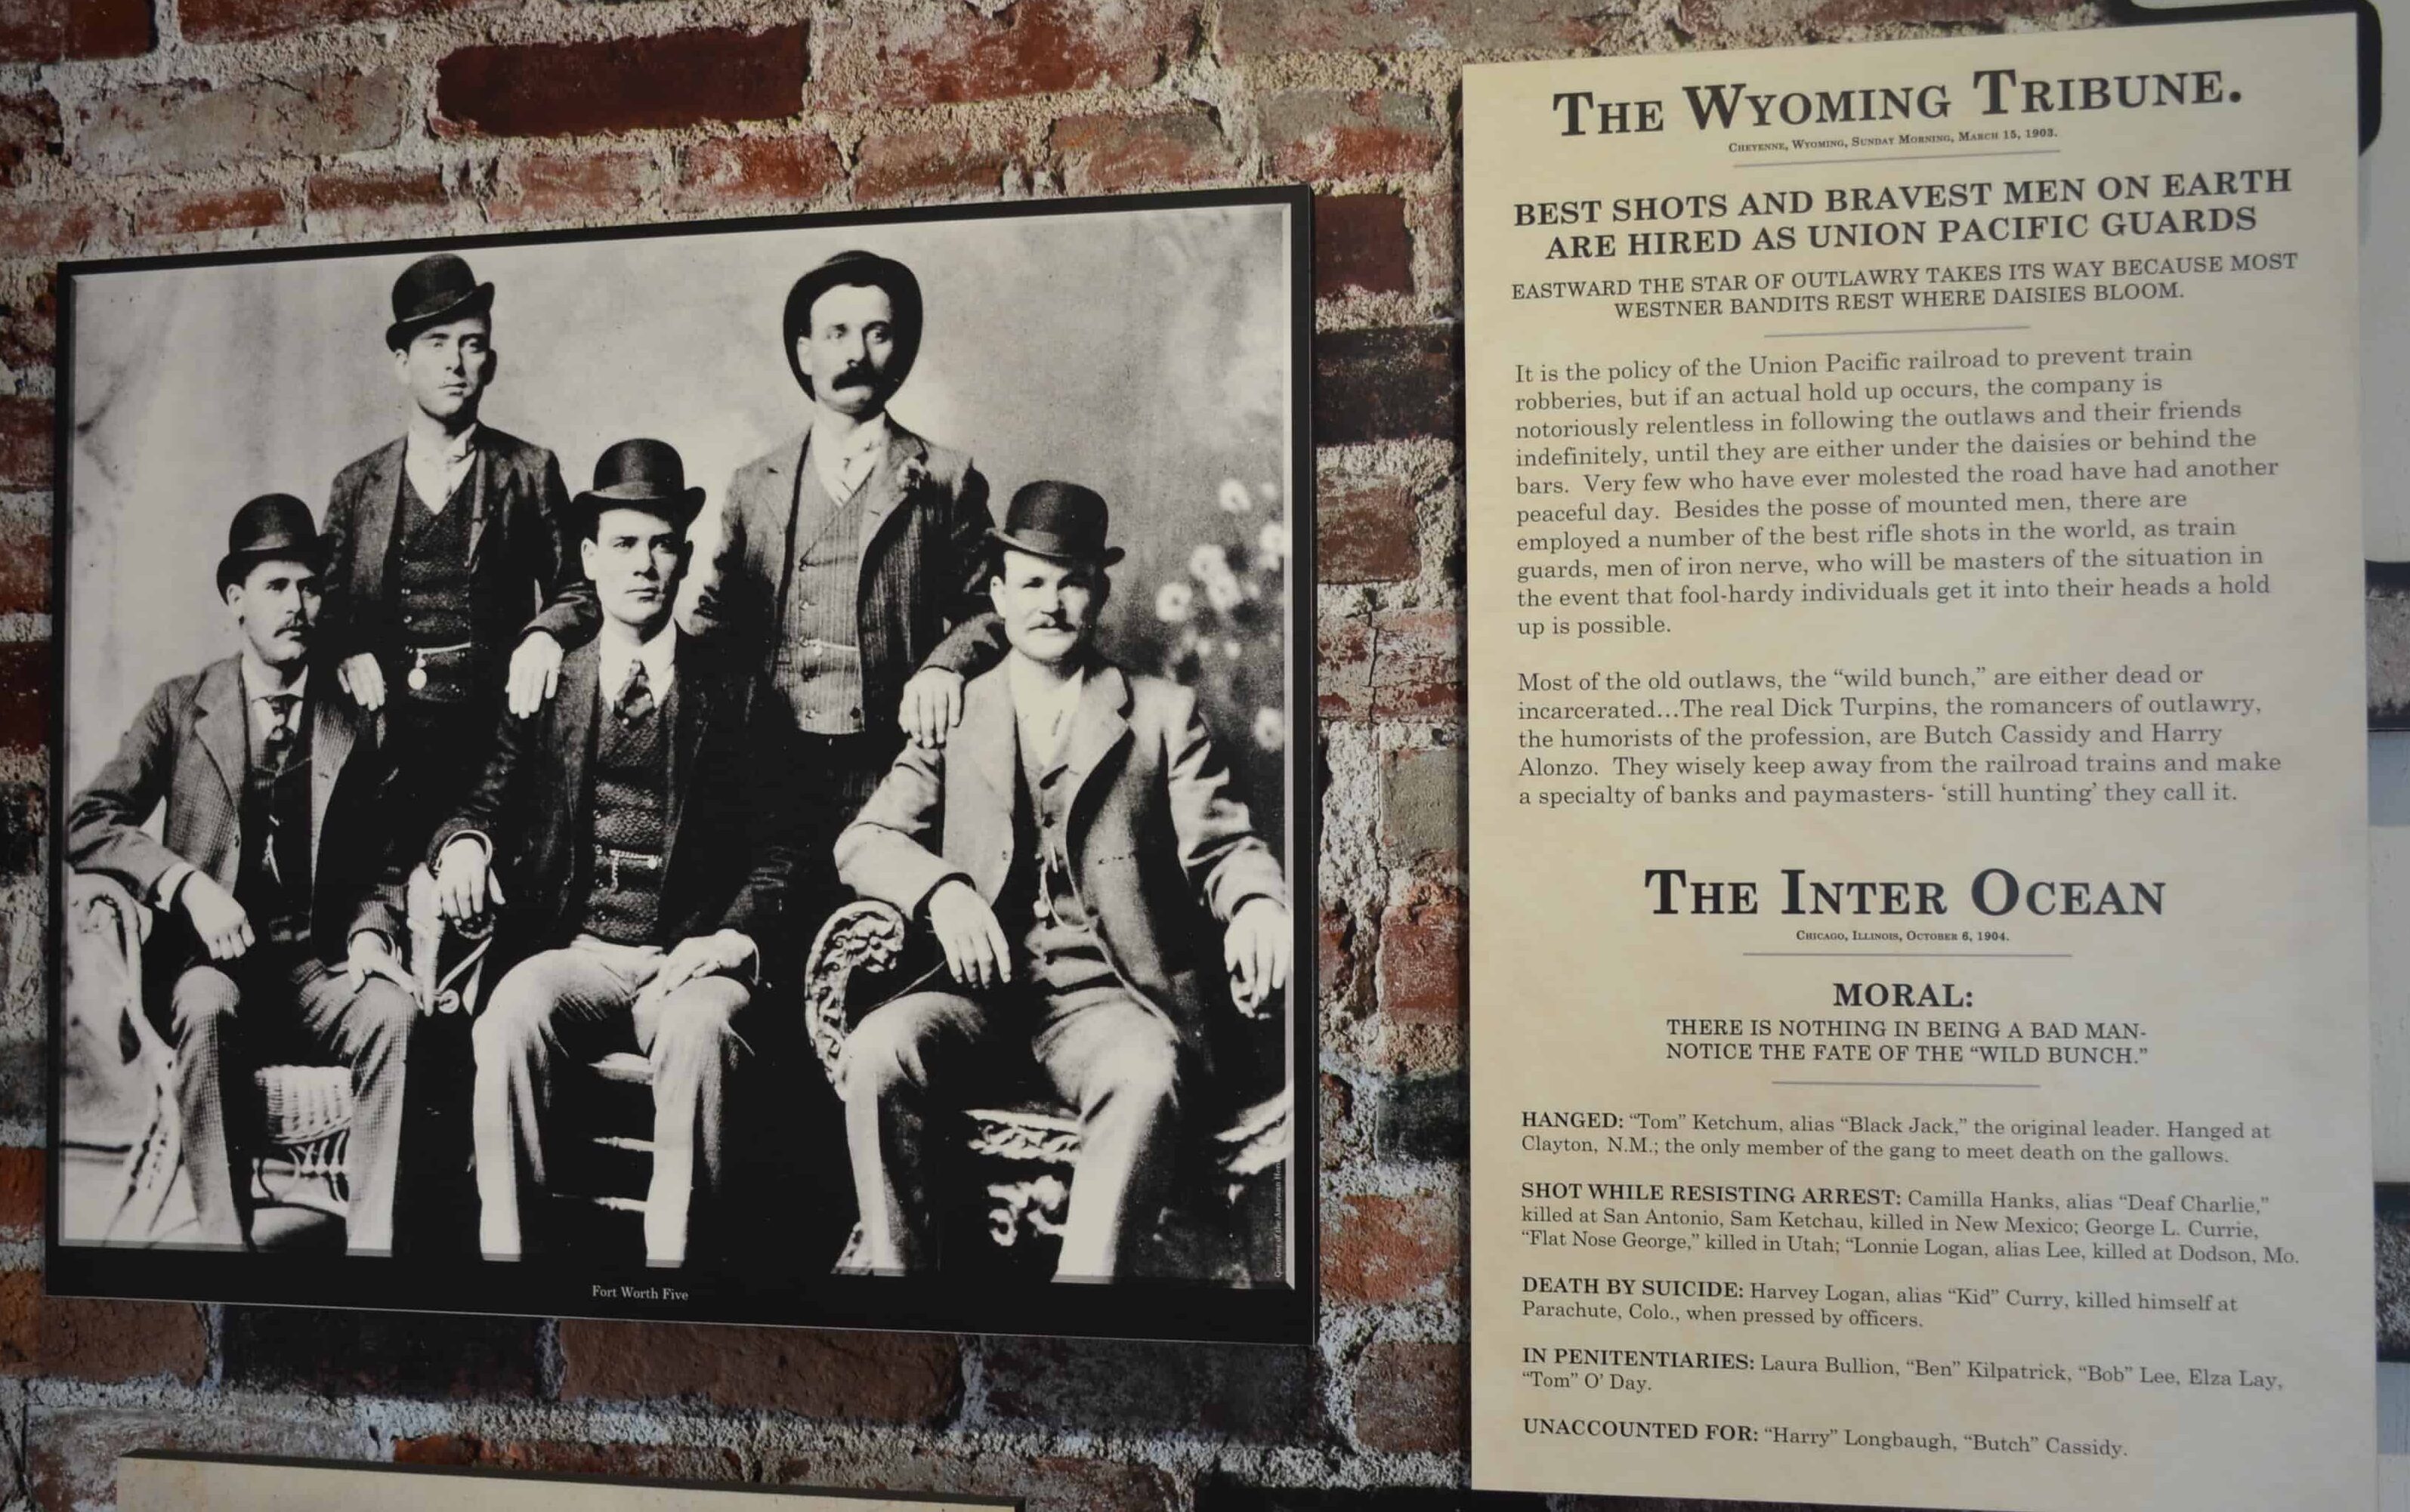 The Hole in the Wall Gang in the Butch Cassidy exhibit